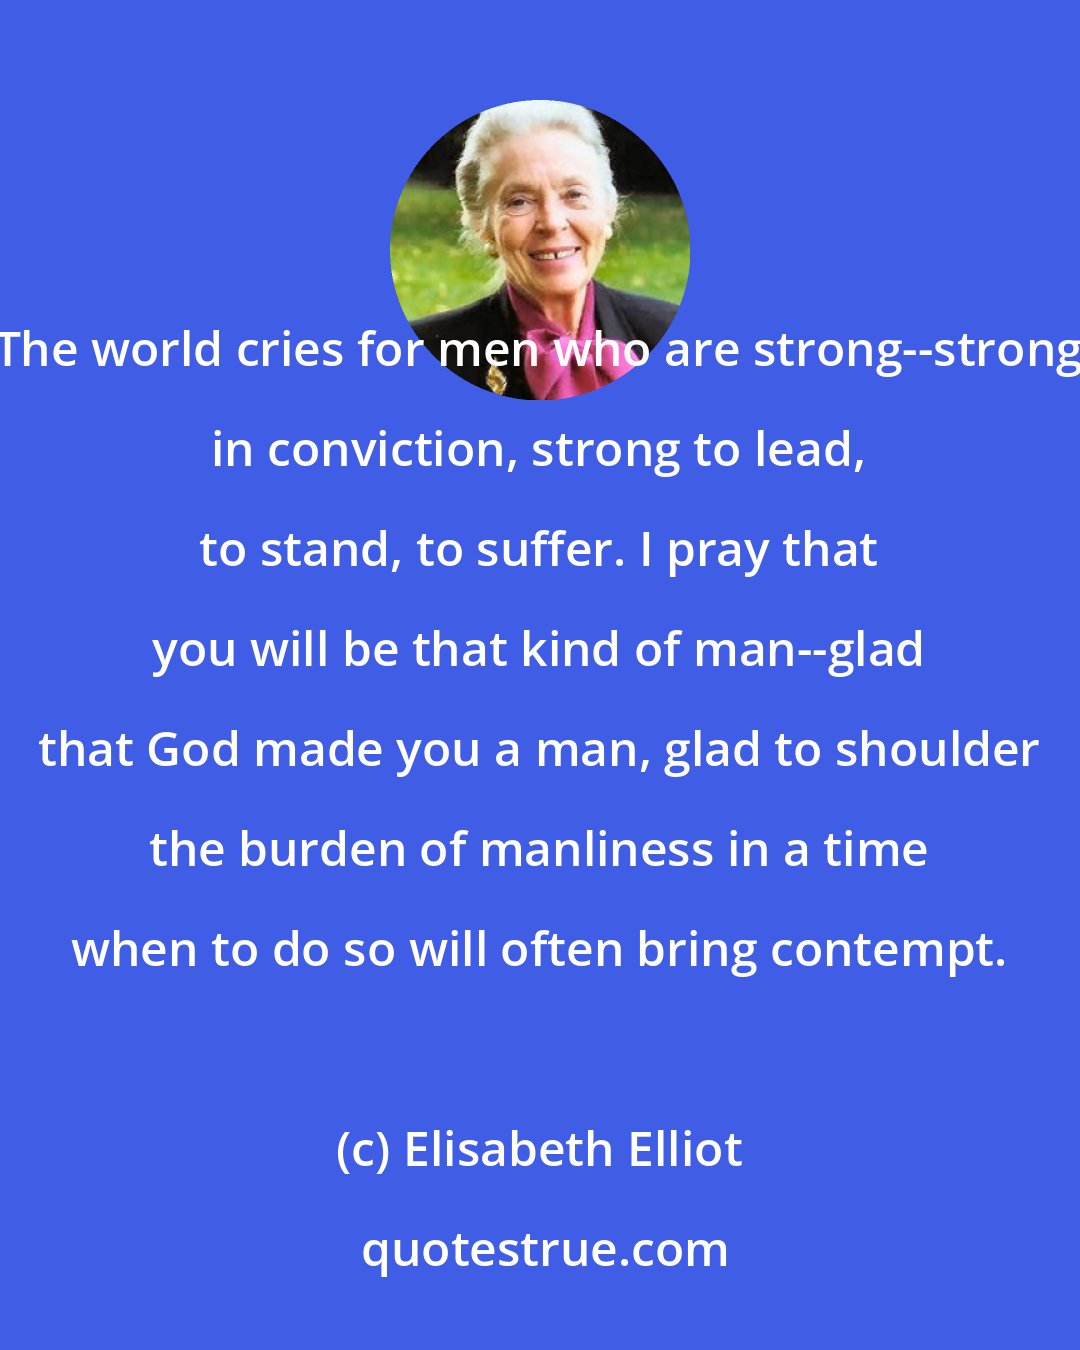 Elisabeth Elliot: The world cries for men who are strong--strong in conviction, strong to lead, to stand, to suffer. I pray that you will be that kind of man--glad that God made you a man, glad to shoulder the burden of manliness in a time when to do so will often bring contempt.